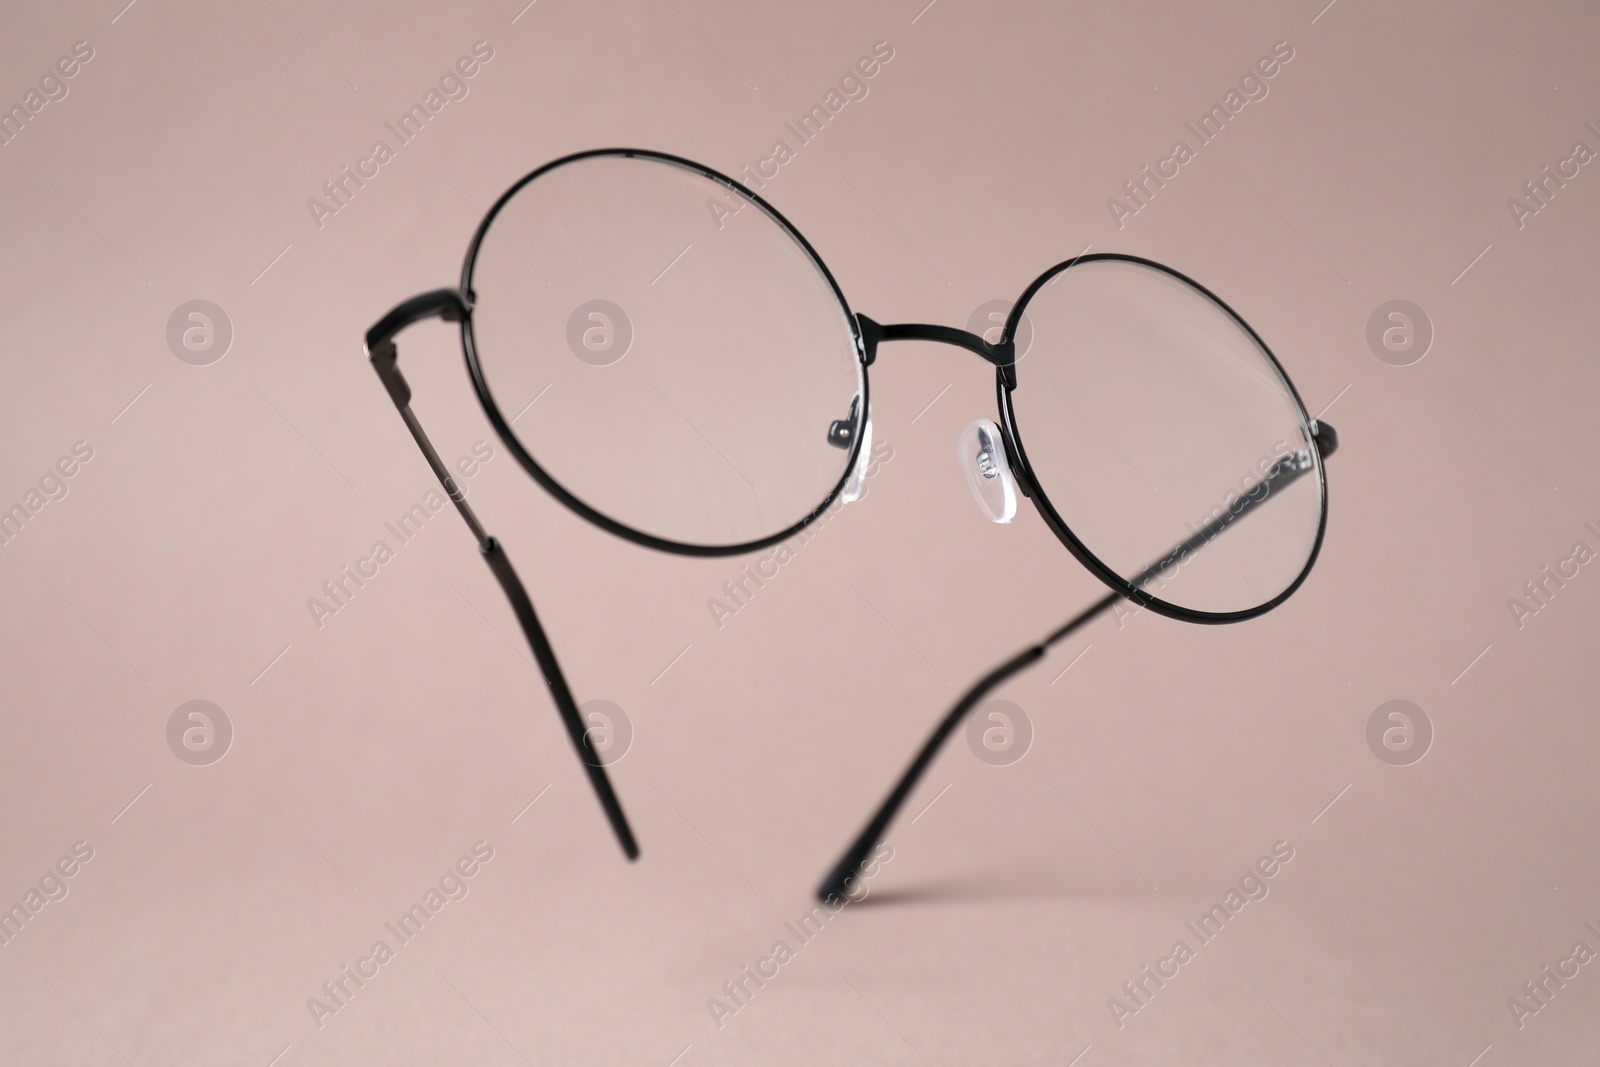 Photo of Stylish pair of glasses with black frame on pale brown background